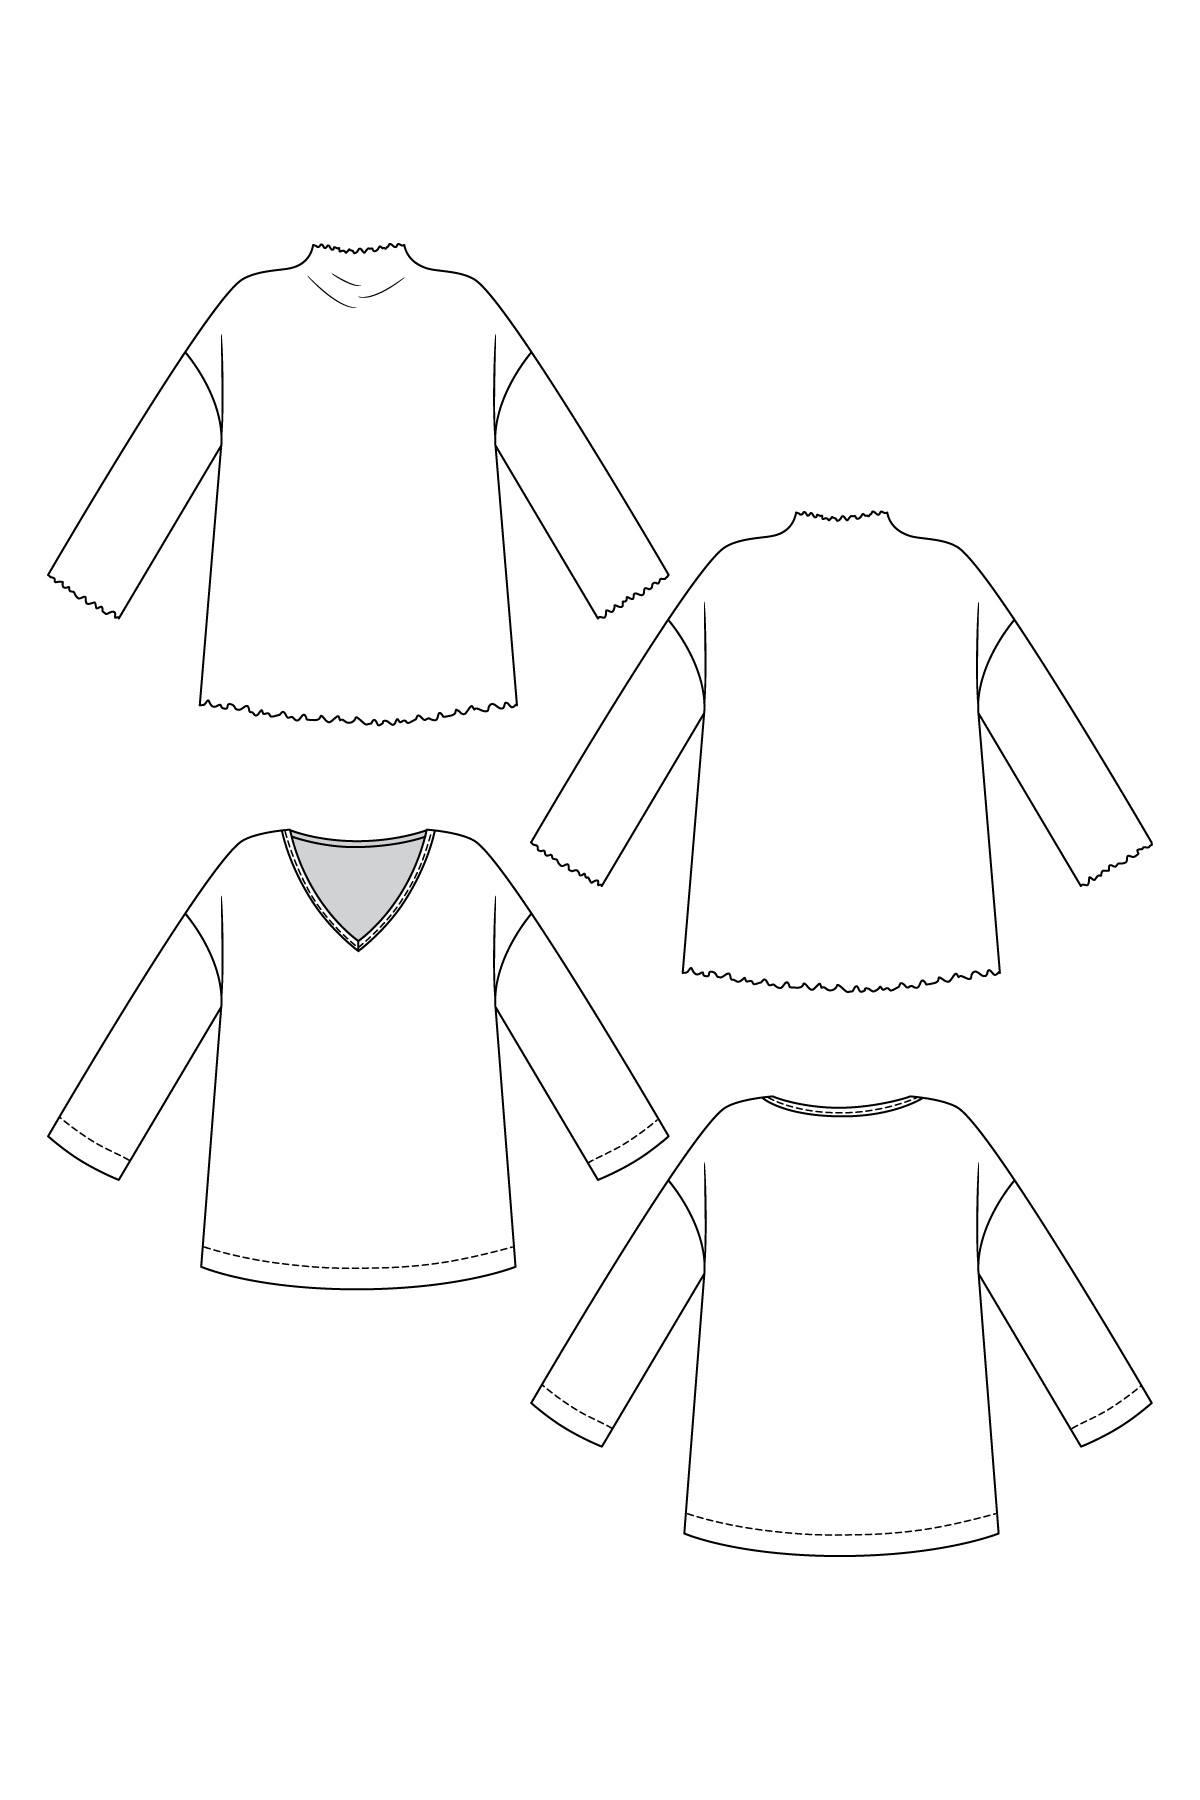 Named Clothing Olo Tee and Pants Set Downloadable Pattern